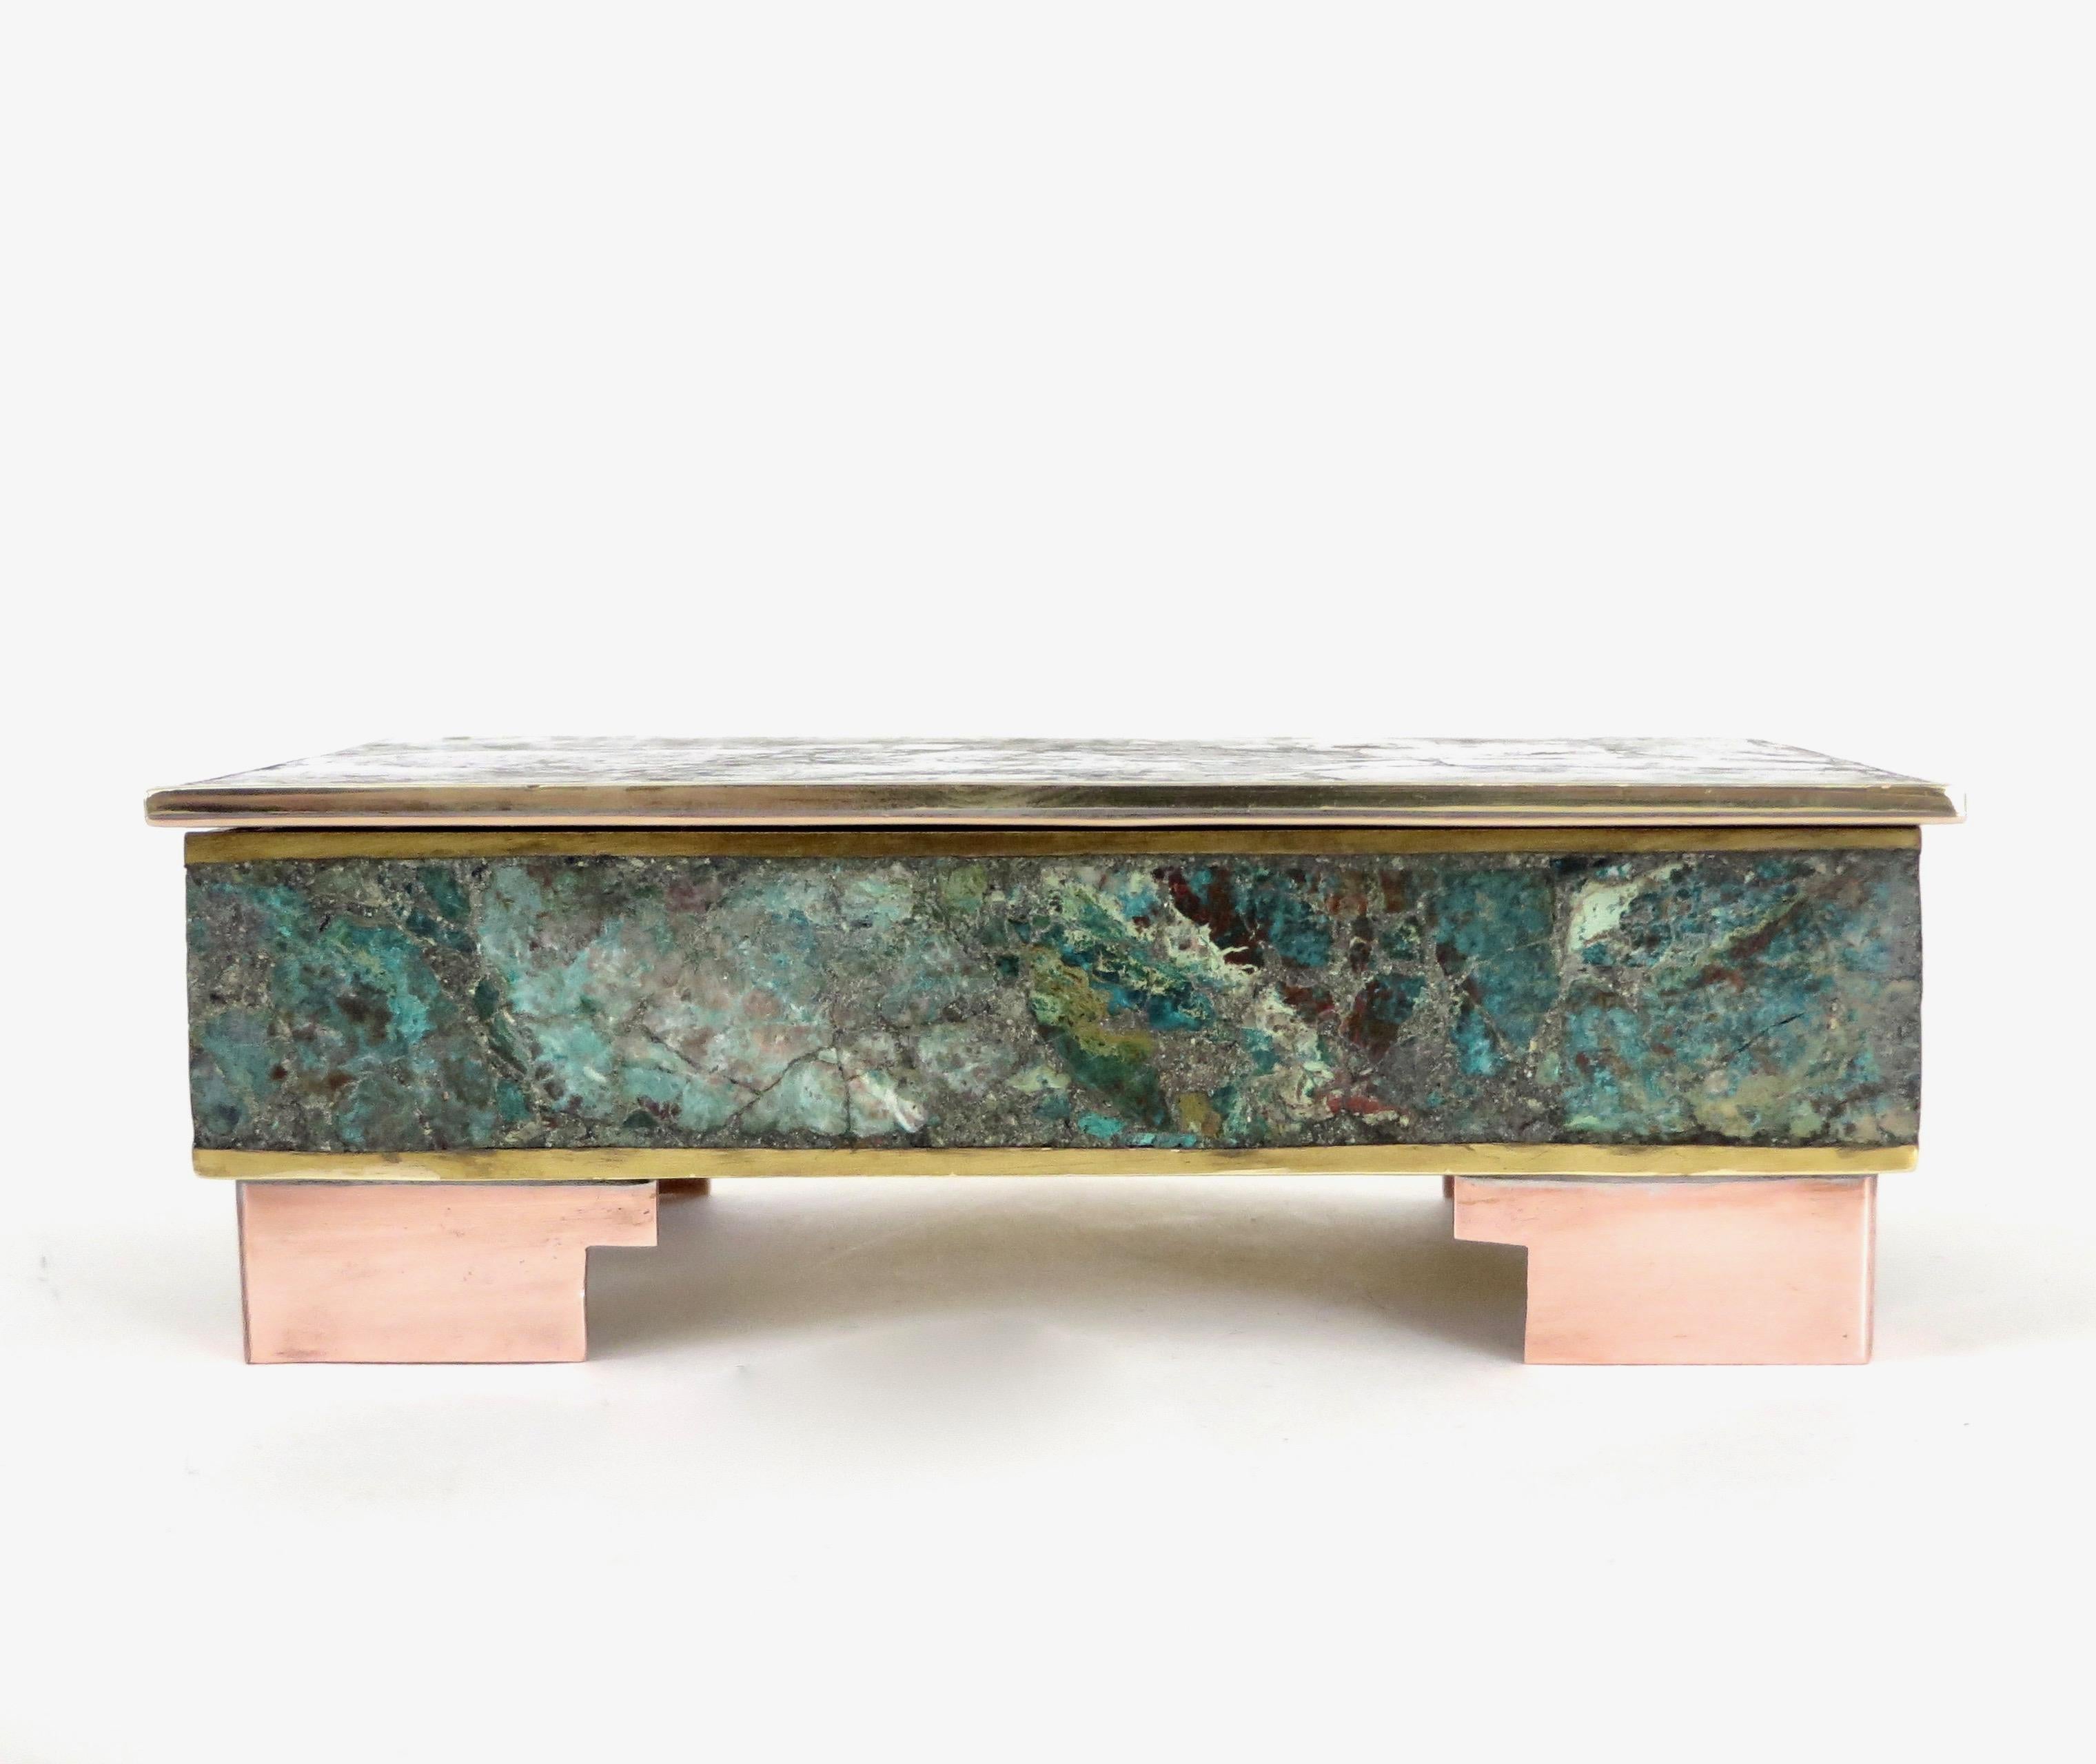 Hinged inlaid malachite and sodalite brass, copper and bronze metal box with rosewood interior,
circa 1960
Stone inlay, bronze, brass on raised copper feet.
Marked Hecho en Mexico.